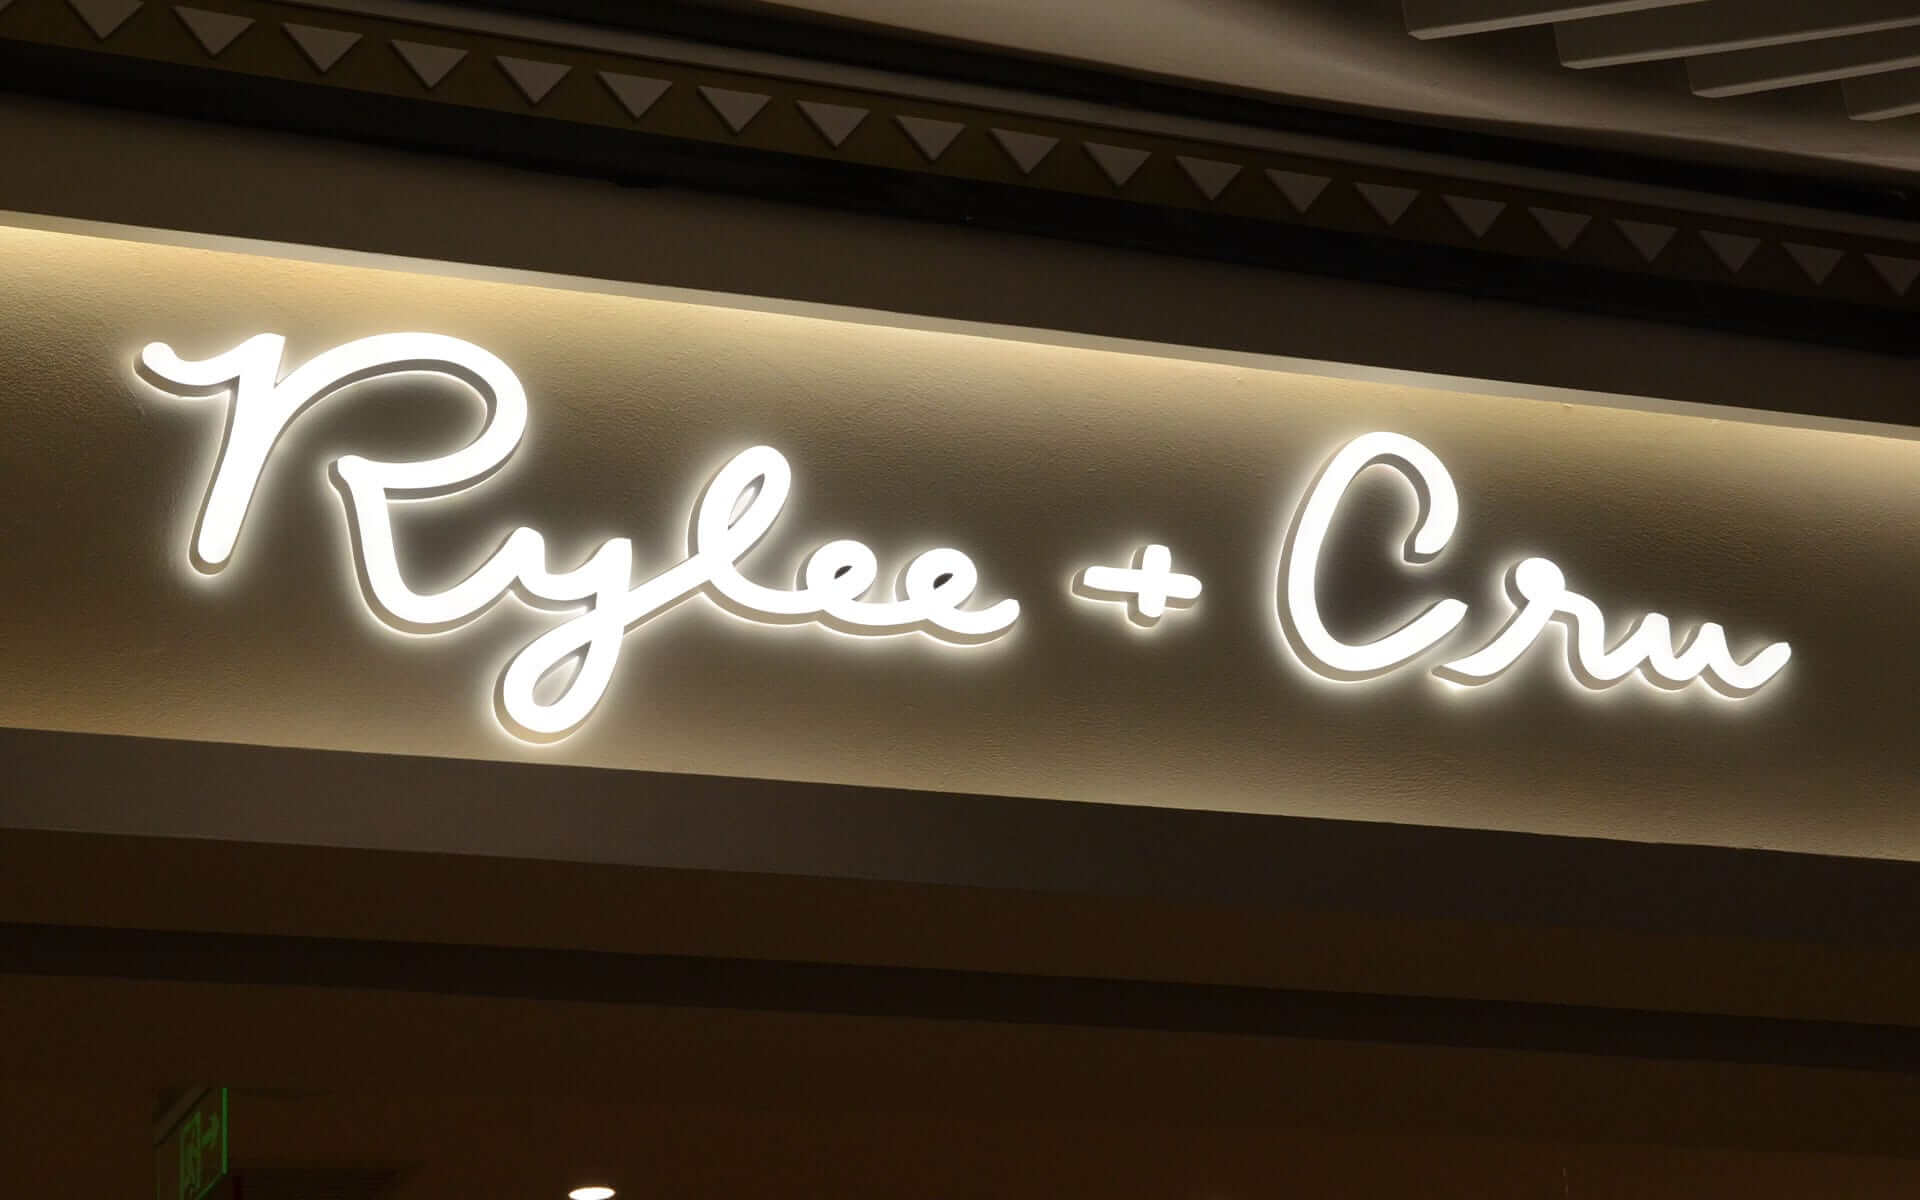 Face and Back-lit Acrylic Channel Letters for Rylee + Cru